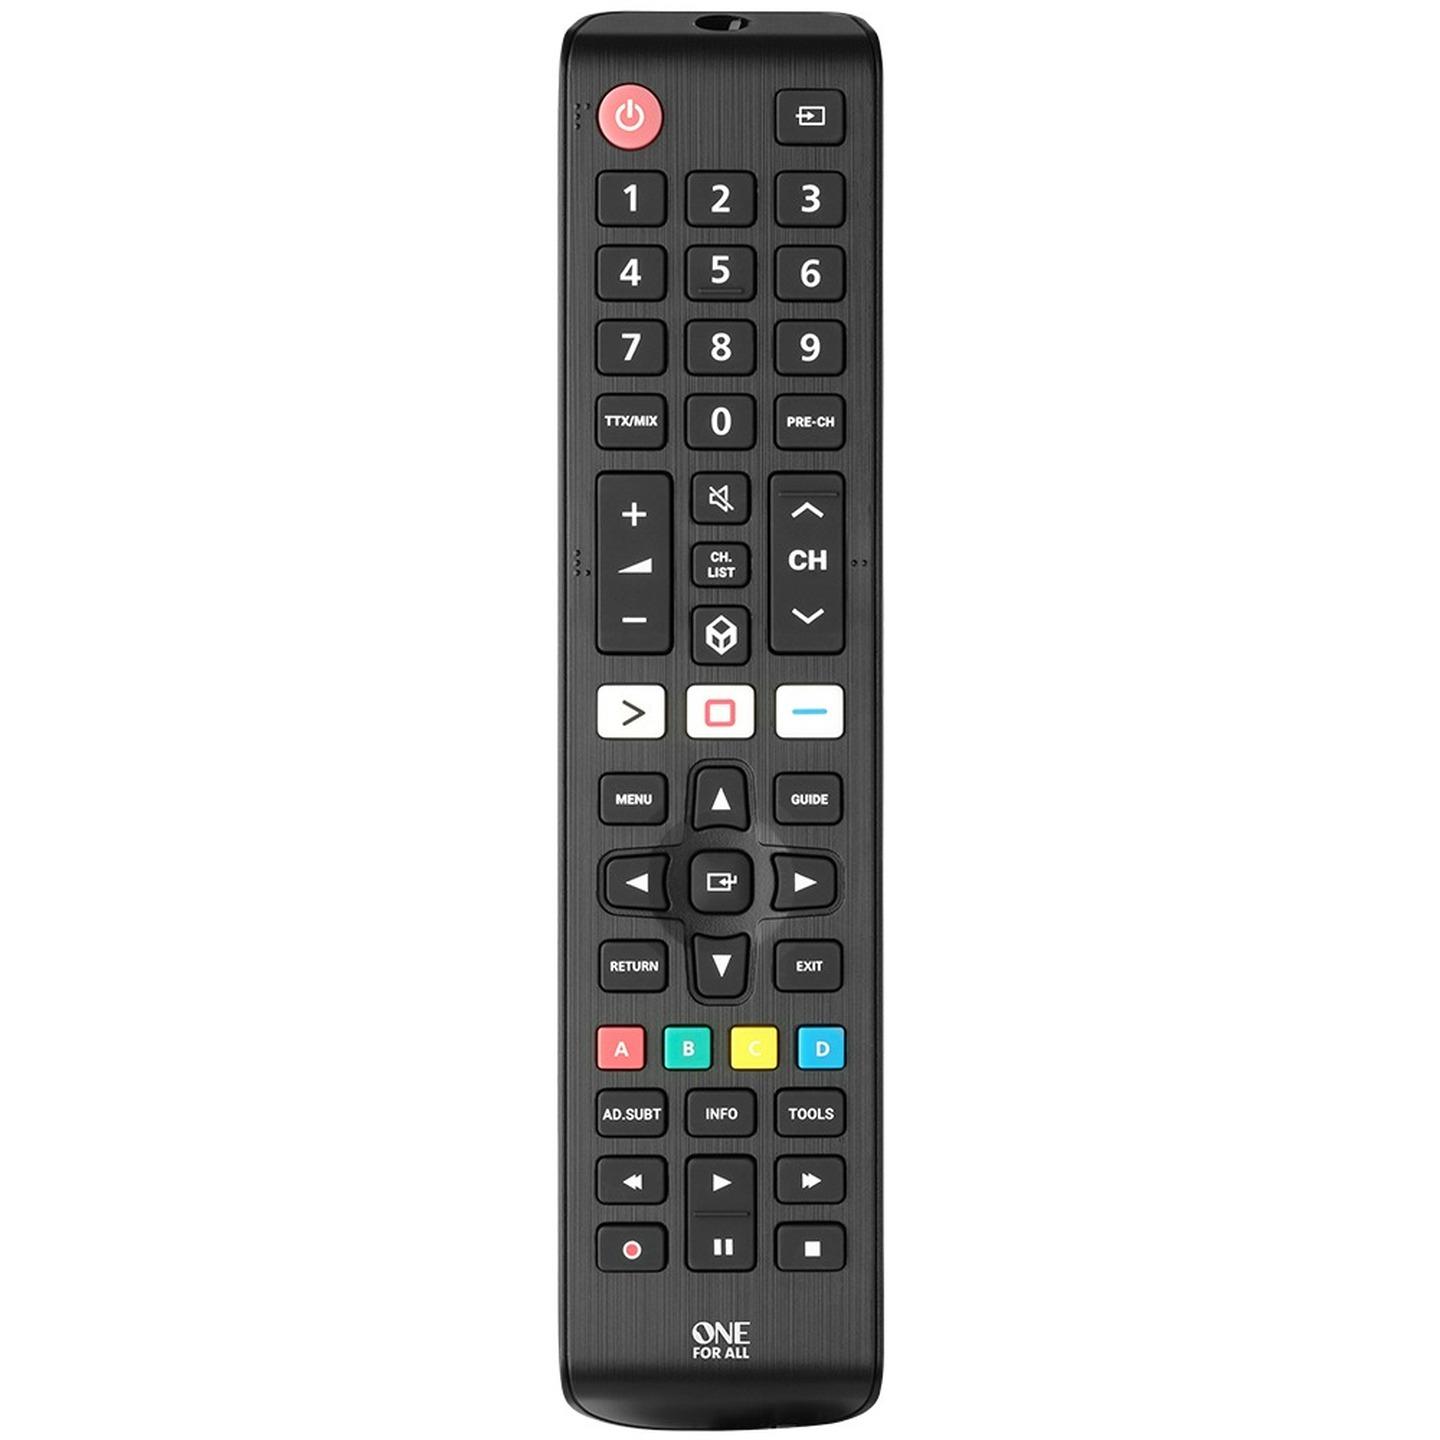 One for all Remote to Suit Panasonic TV with NET-TV